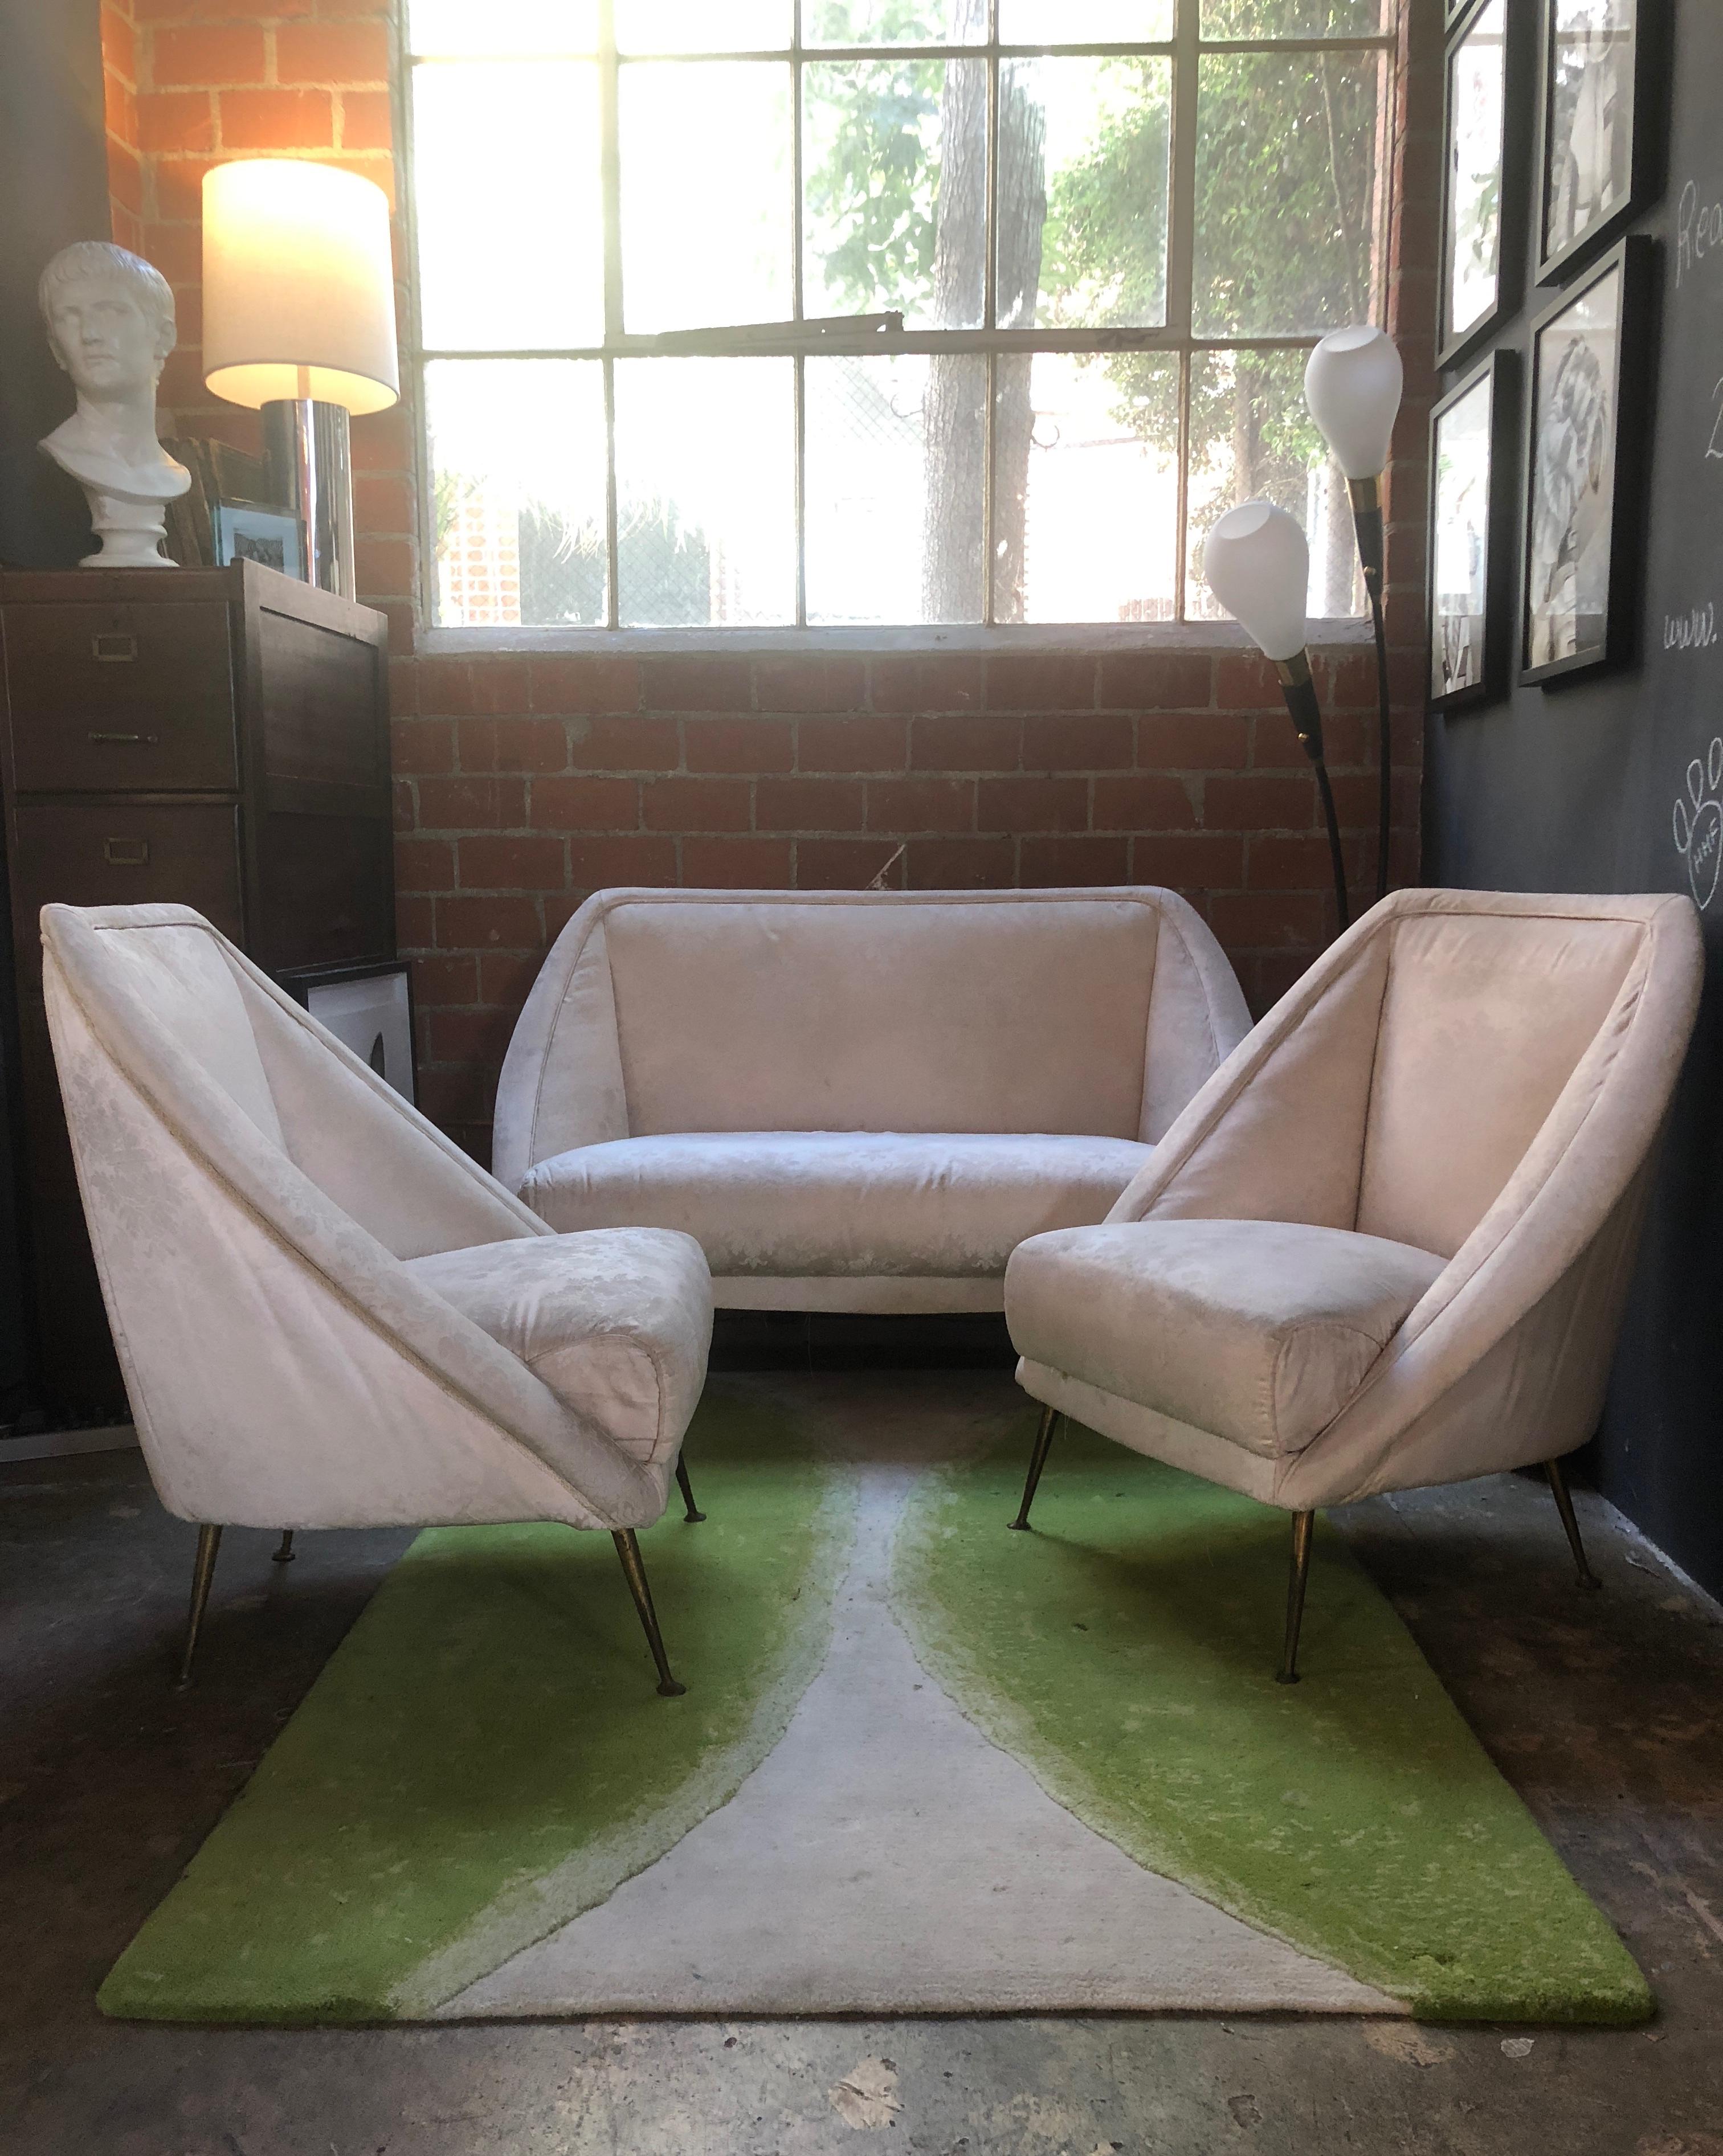 Rare model of sofa and lounge chairs designed by Guglielmo Veronesi and created by Pigoli's brothers from Cabiate, Italy, 1950s.